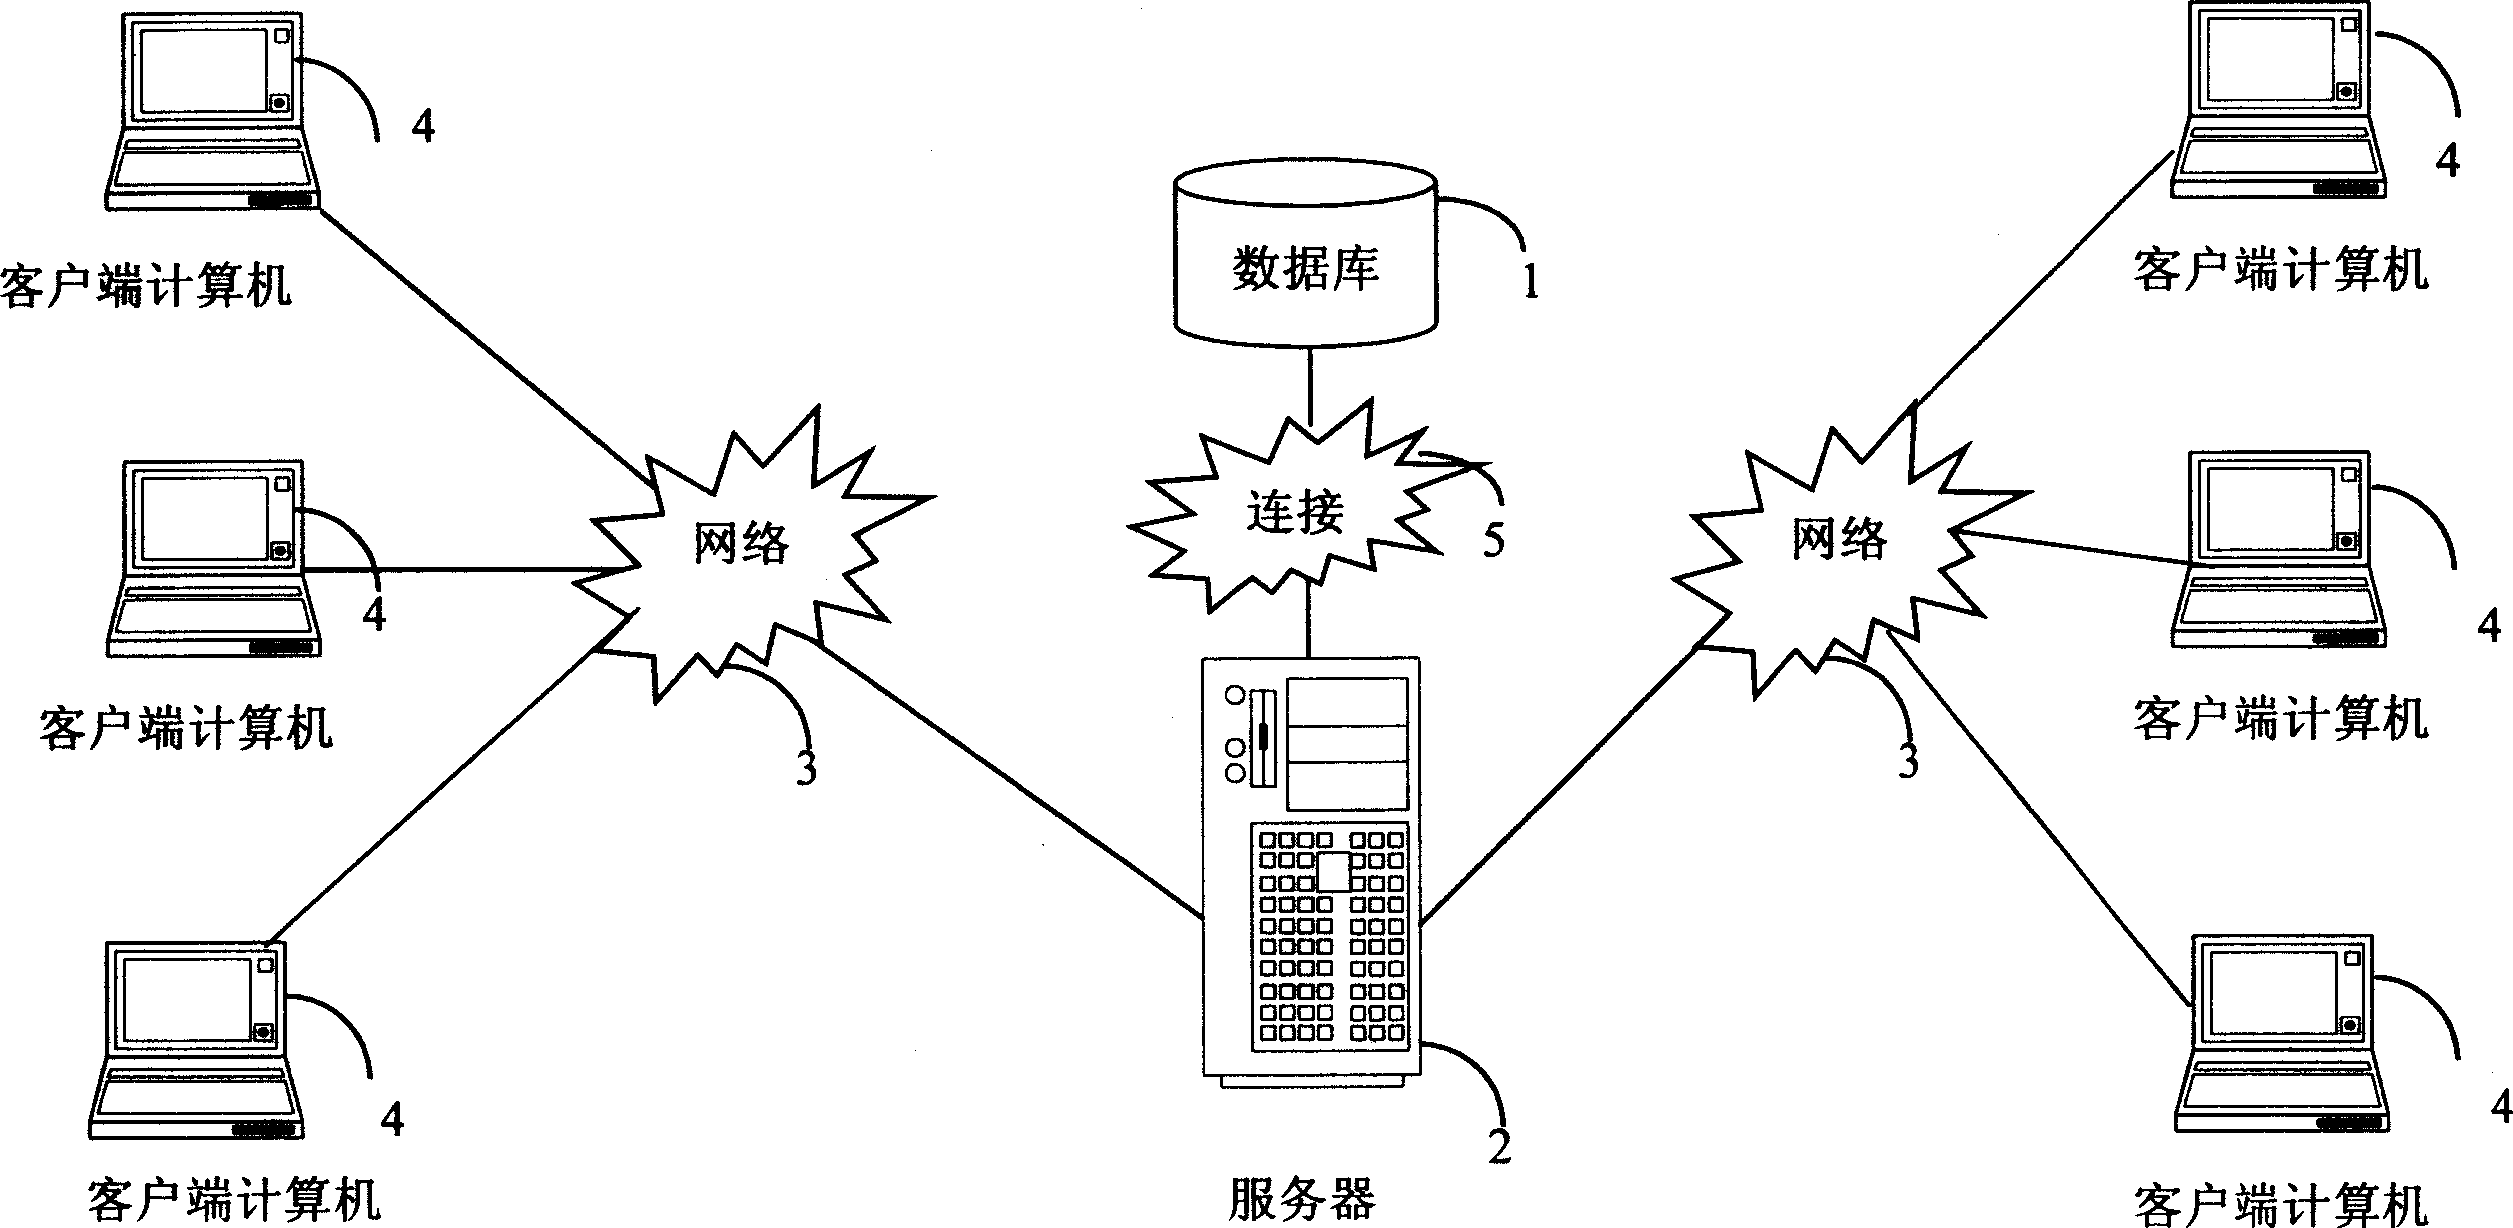 Patent information searching system and method